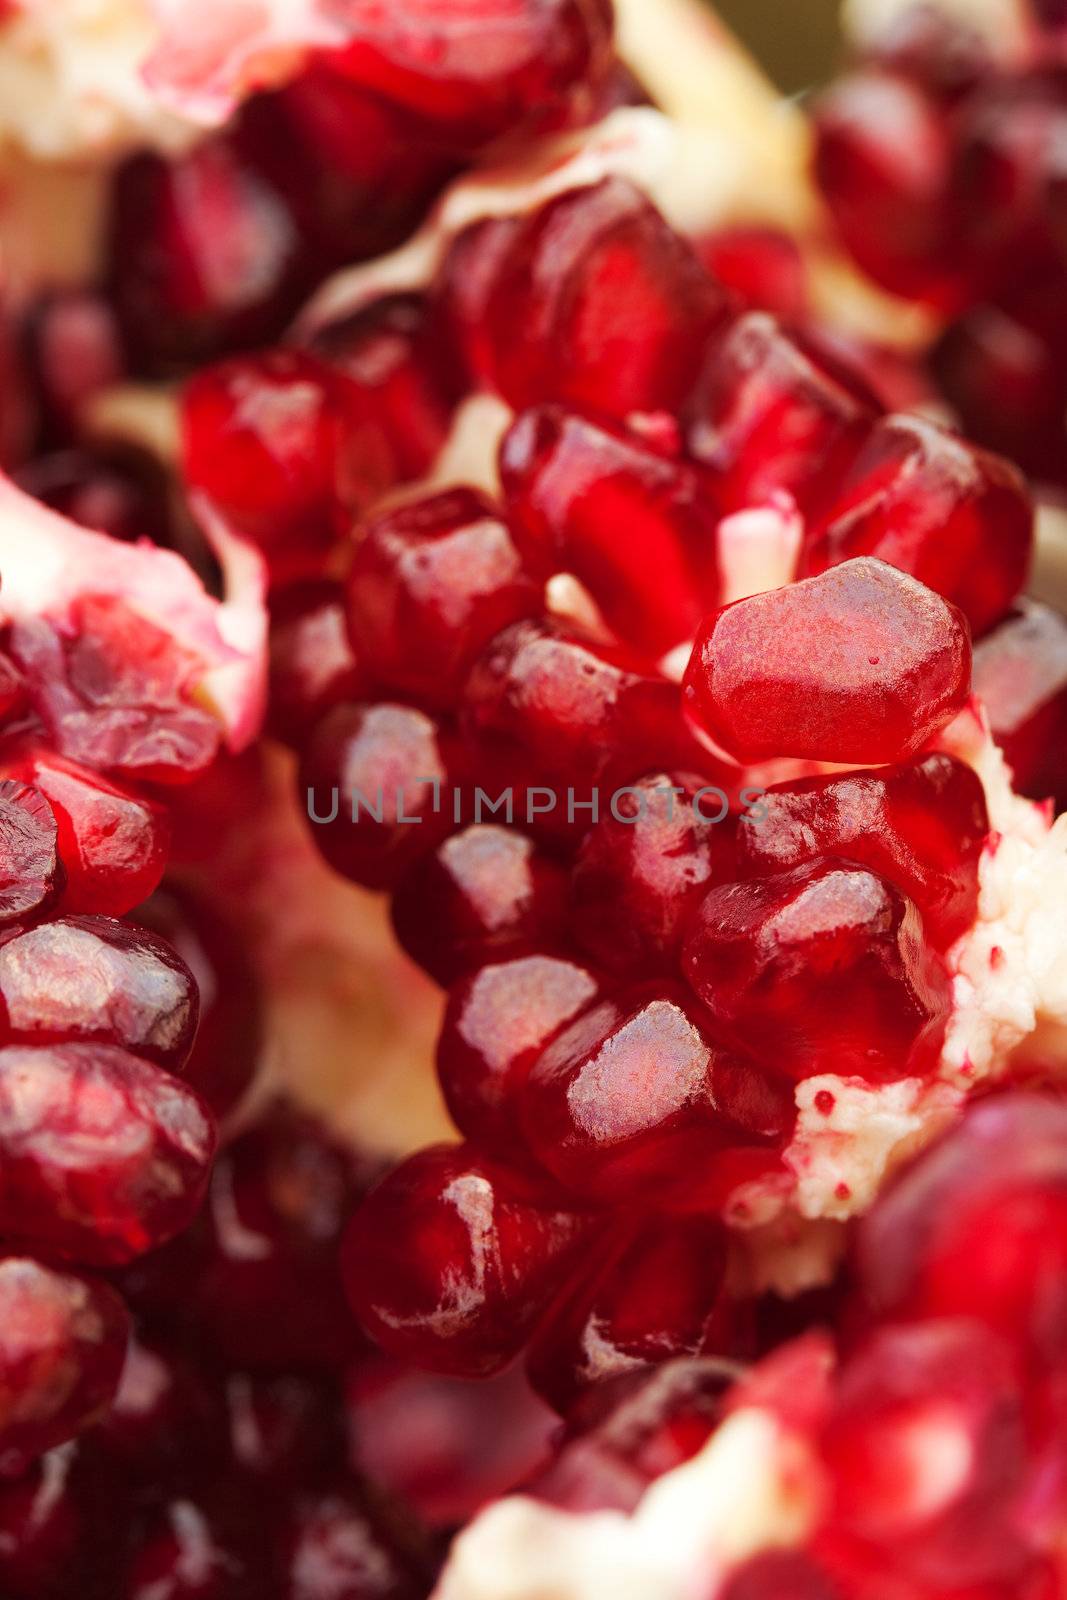 Pomegranate by Gravicapa